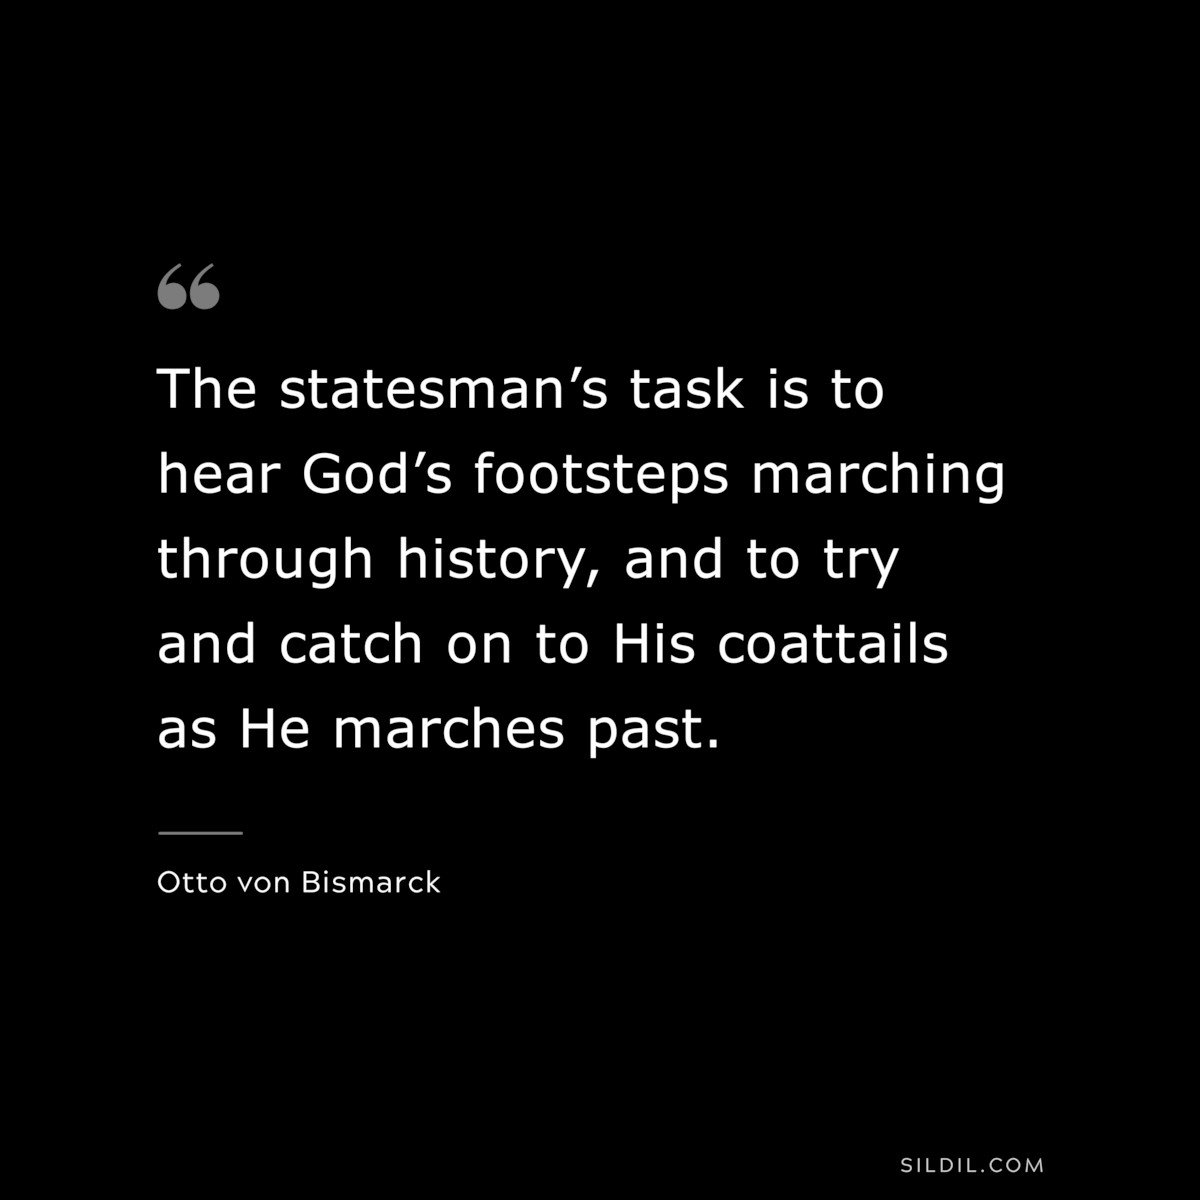 The statesman’s task is to hear God’s footsteps marching through history, and to try and catch on to His coattails as He marches past. ― Otto von Bismarck